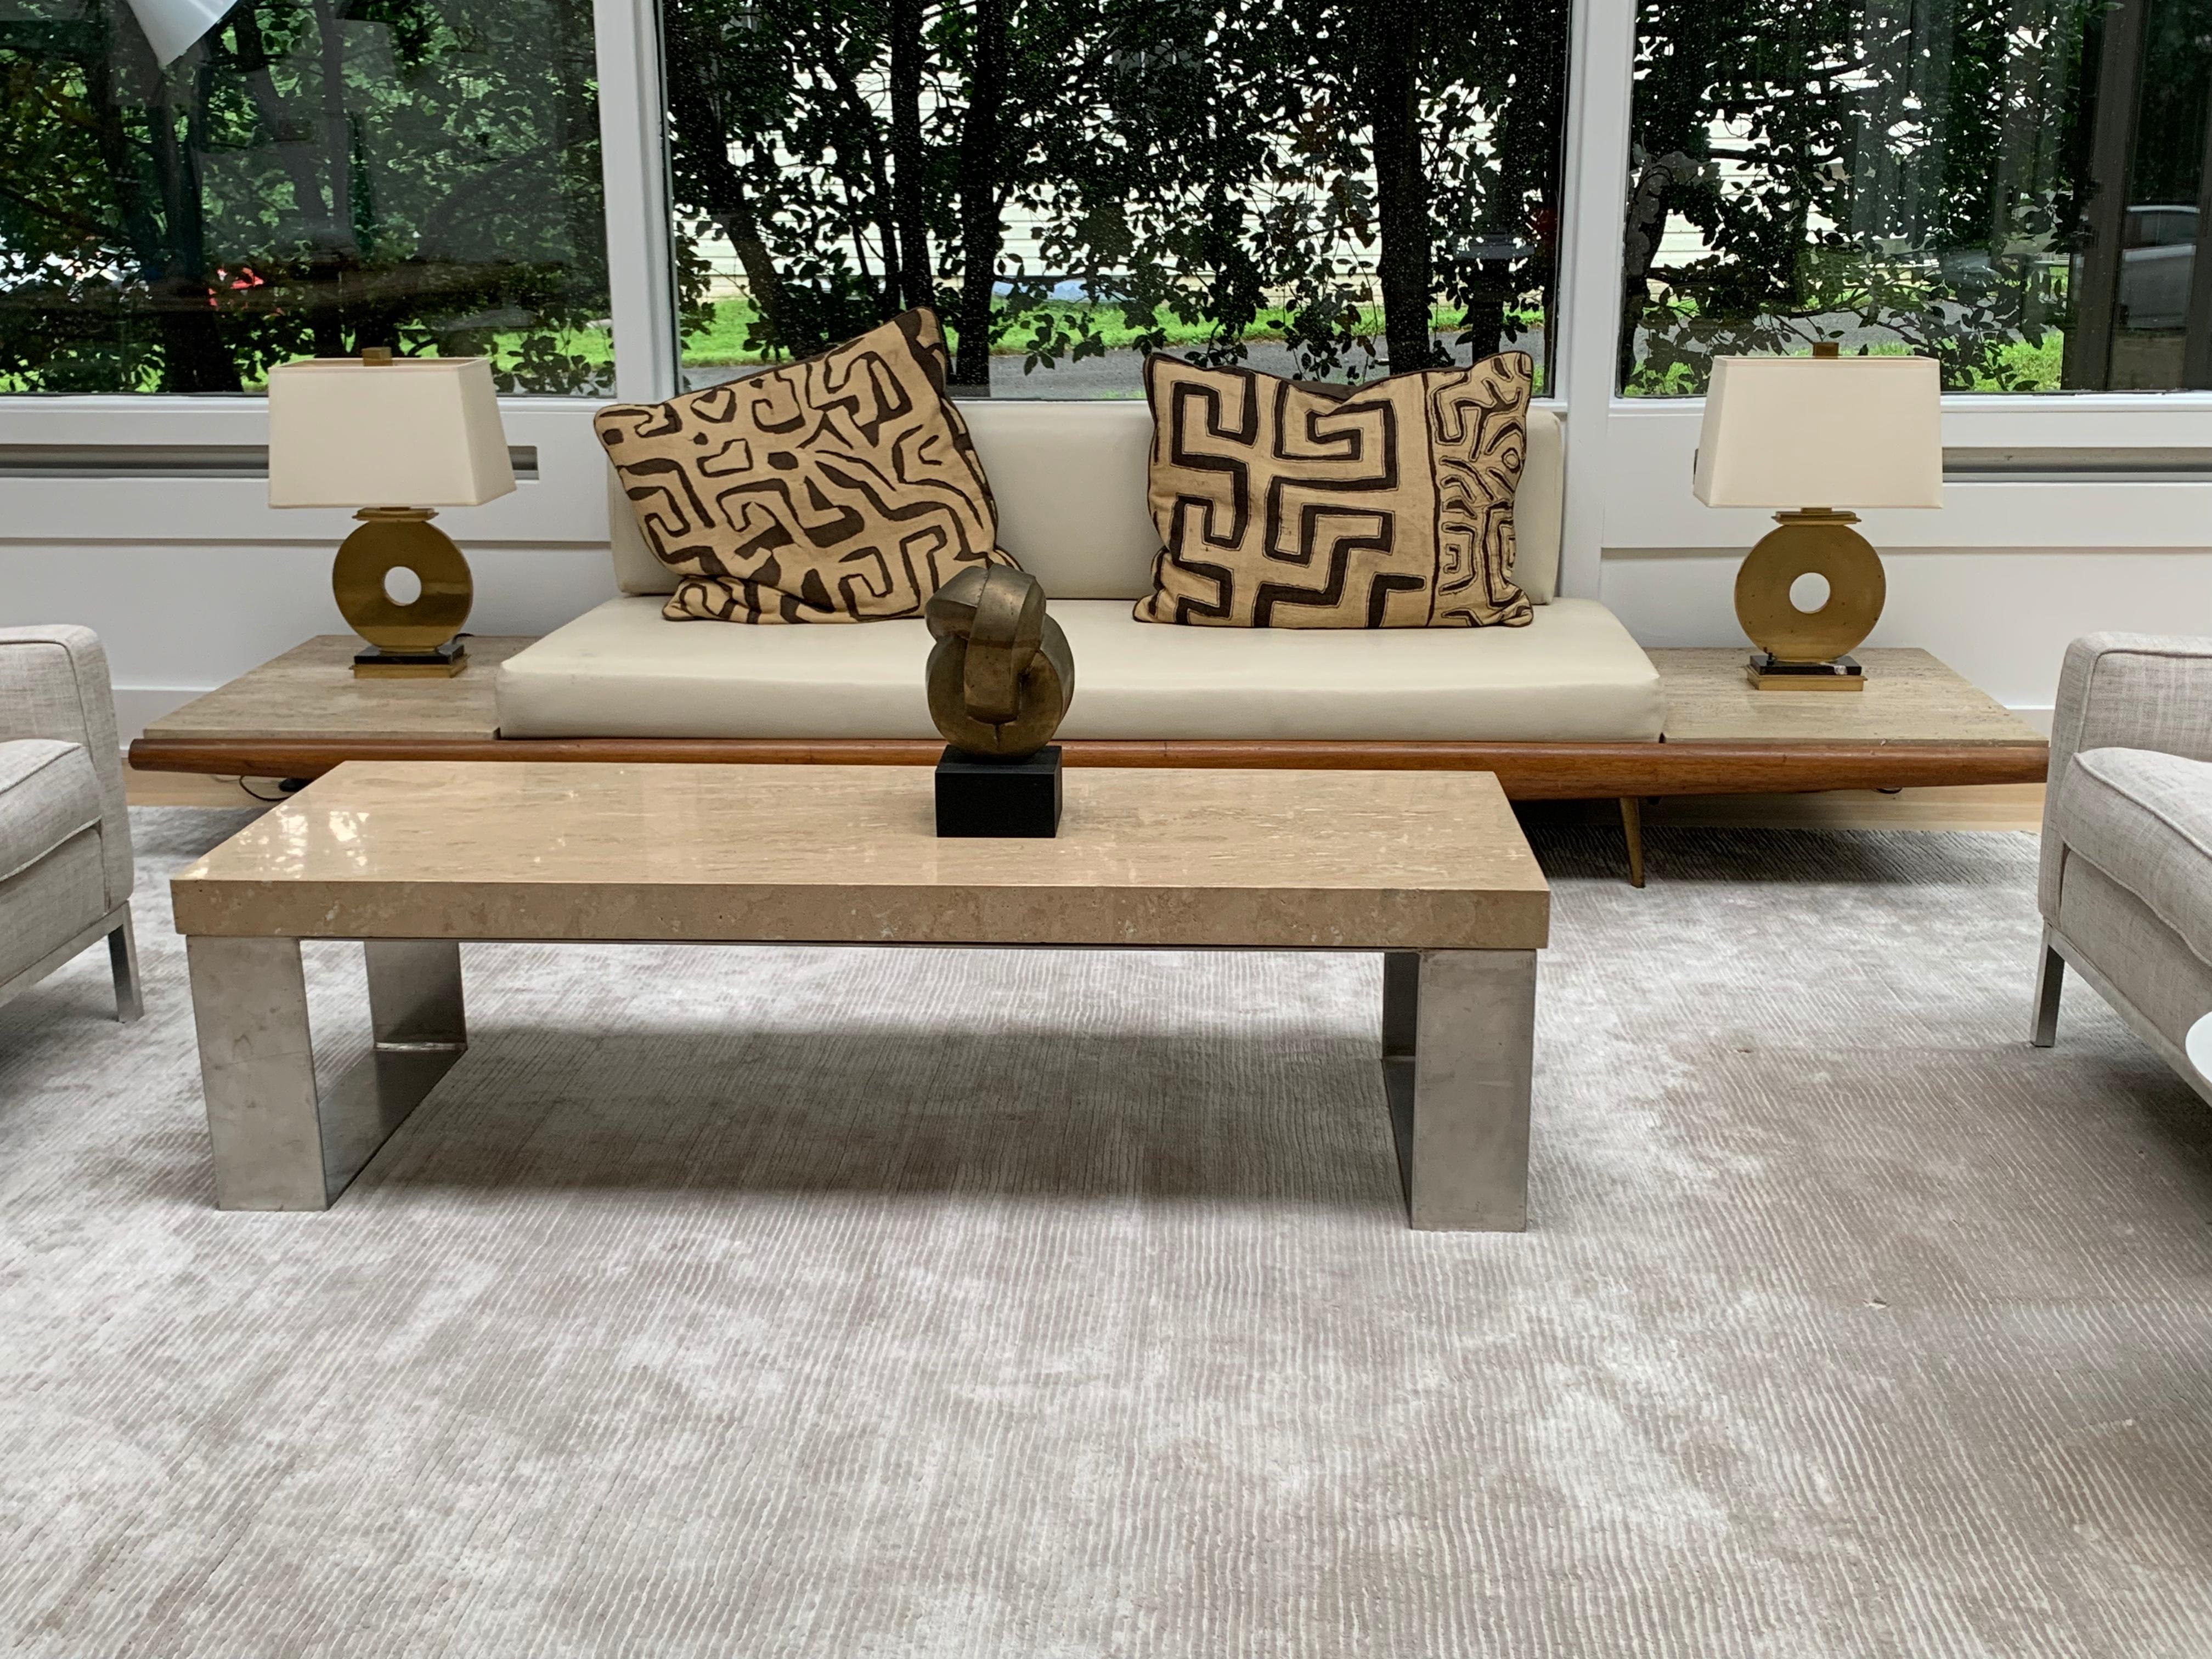  Adrian Pearsall sofa designed with built-in Italian travertine side tables. New foam and faux leather. Original finish on walnut frame and brass feet.